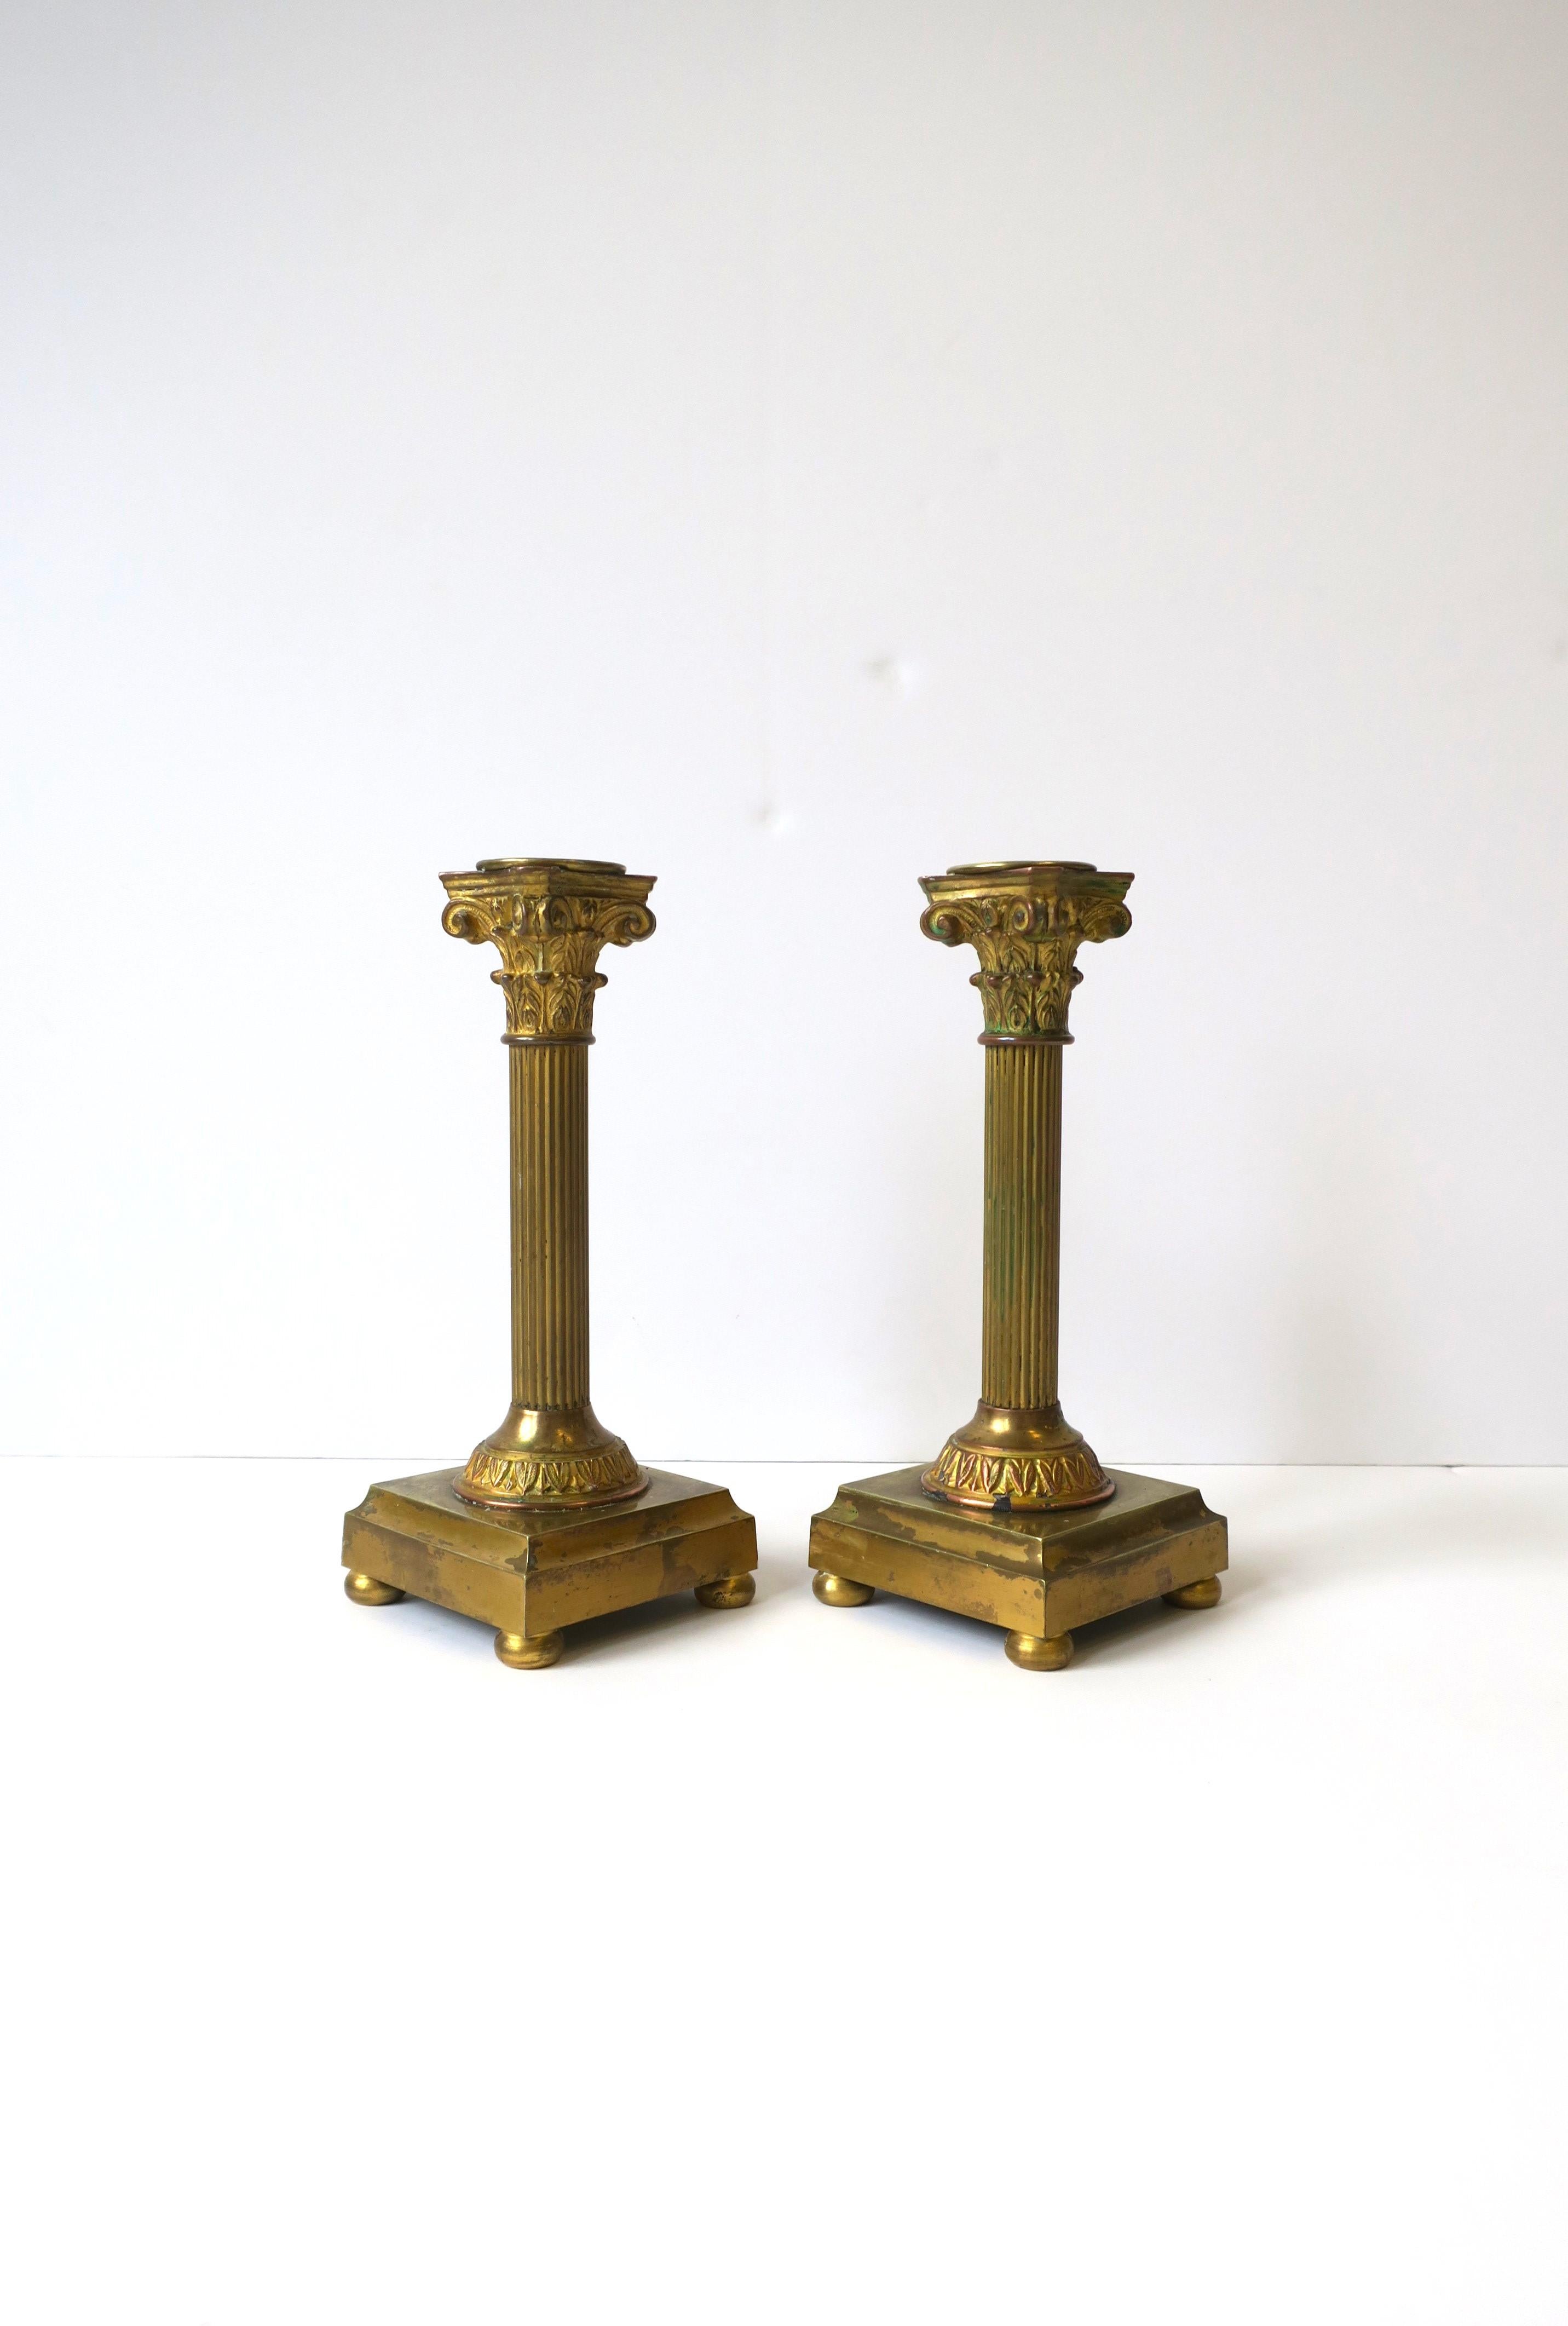 French Neoclassical Bronze Column Pillar Candlesticks Holders, Pair For Sale 3